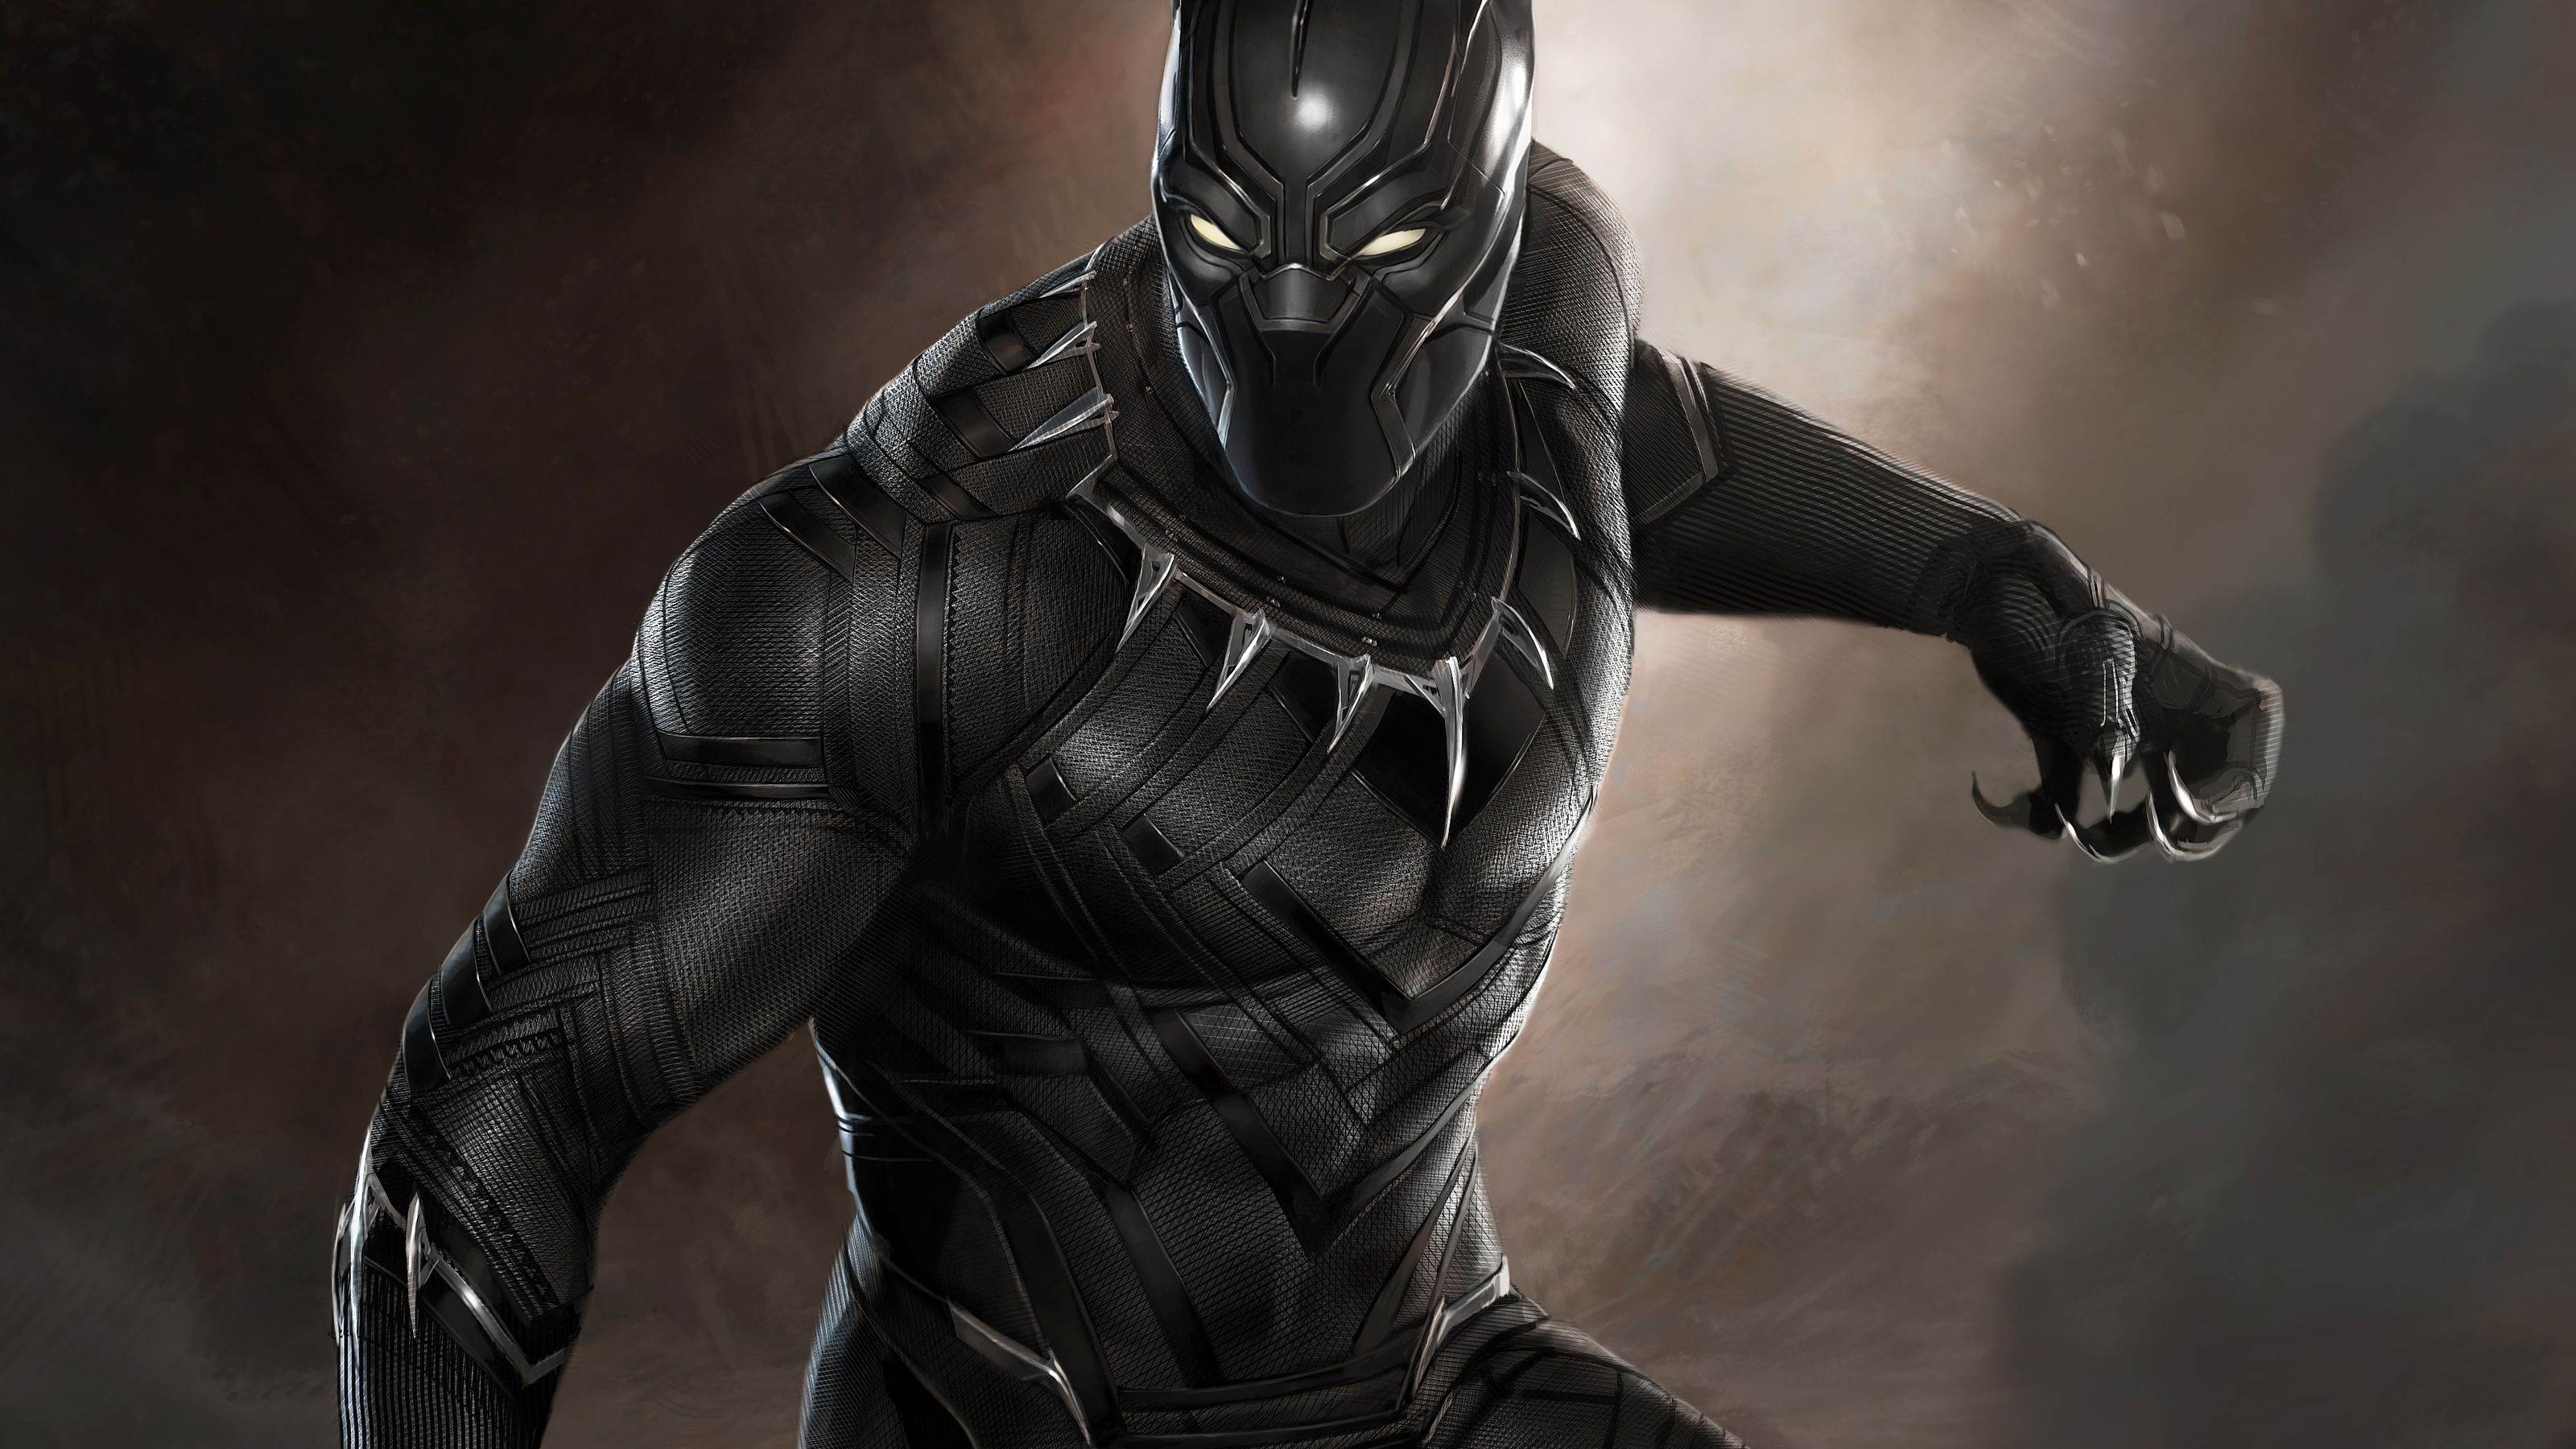 New Captain America: Civil War chase scene with Black Panther revealed